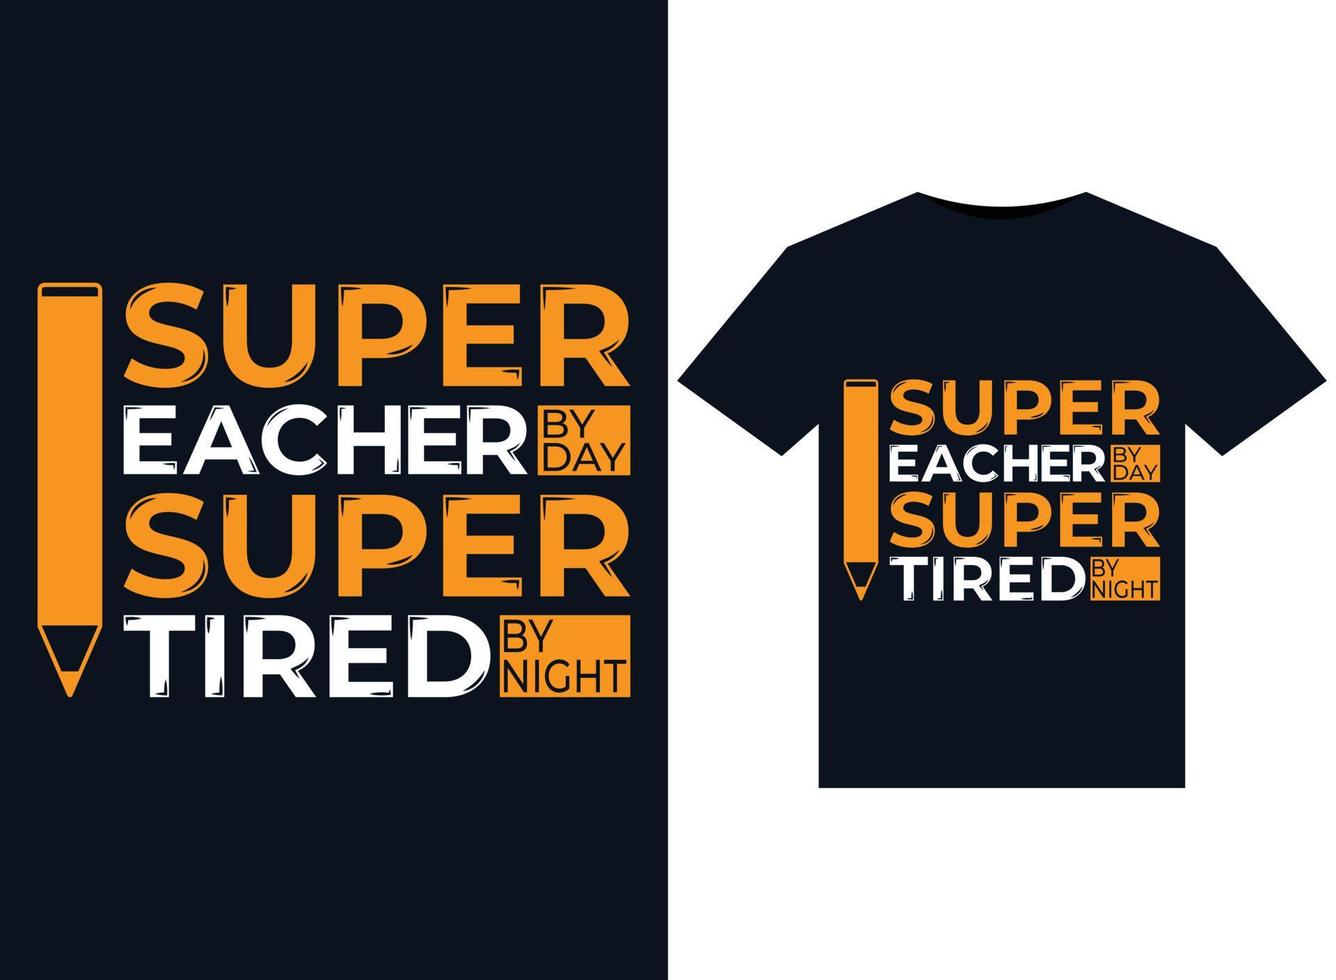 Super Teacher By Day Super Tired By Night illustrations for print-ready T-Shirts desig vector